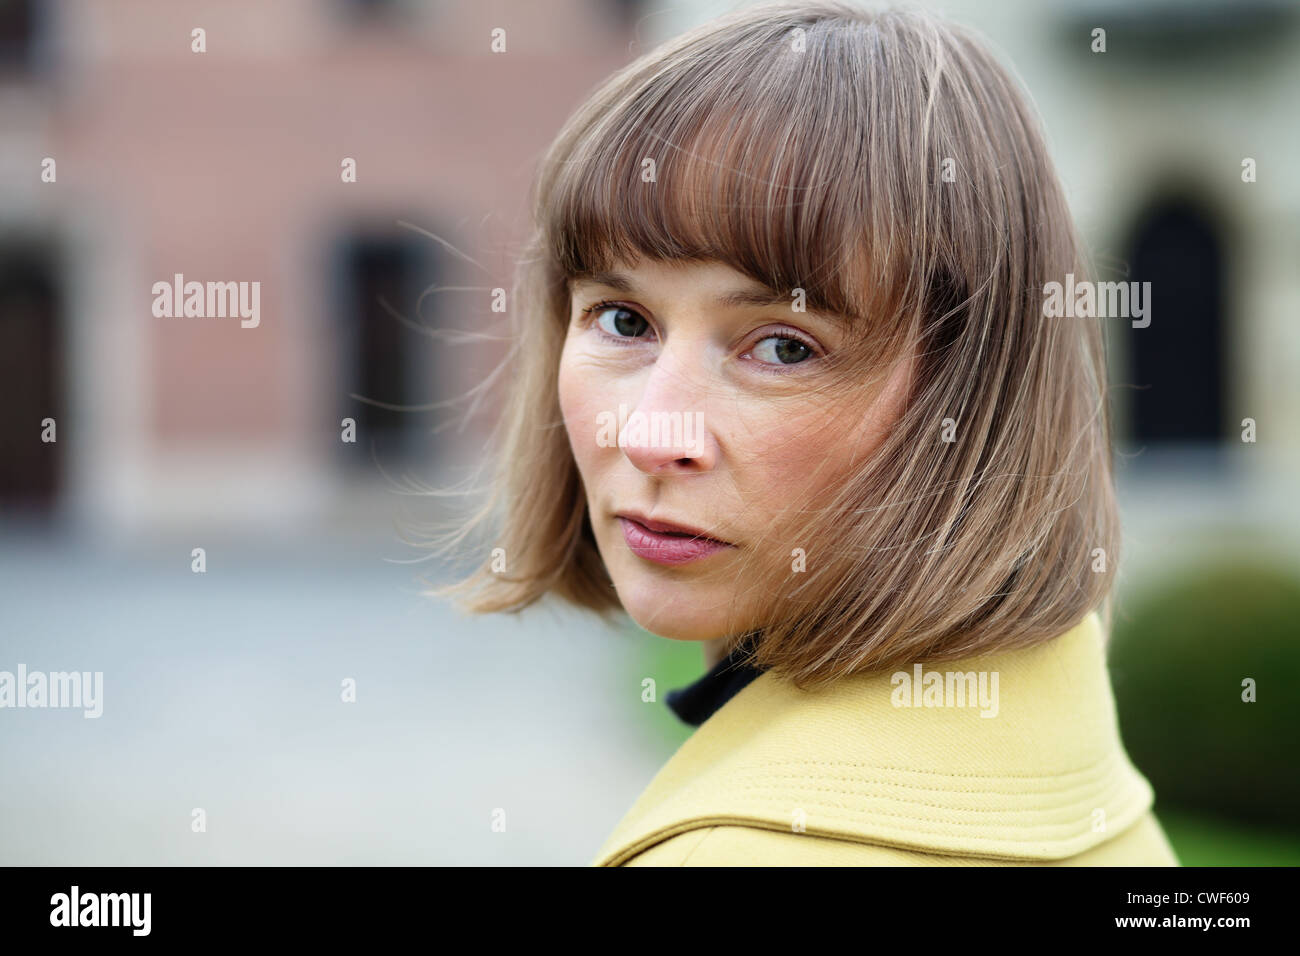 Horizontal outdoor portrait of a midlle aged woman turning back Stock Photo